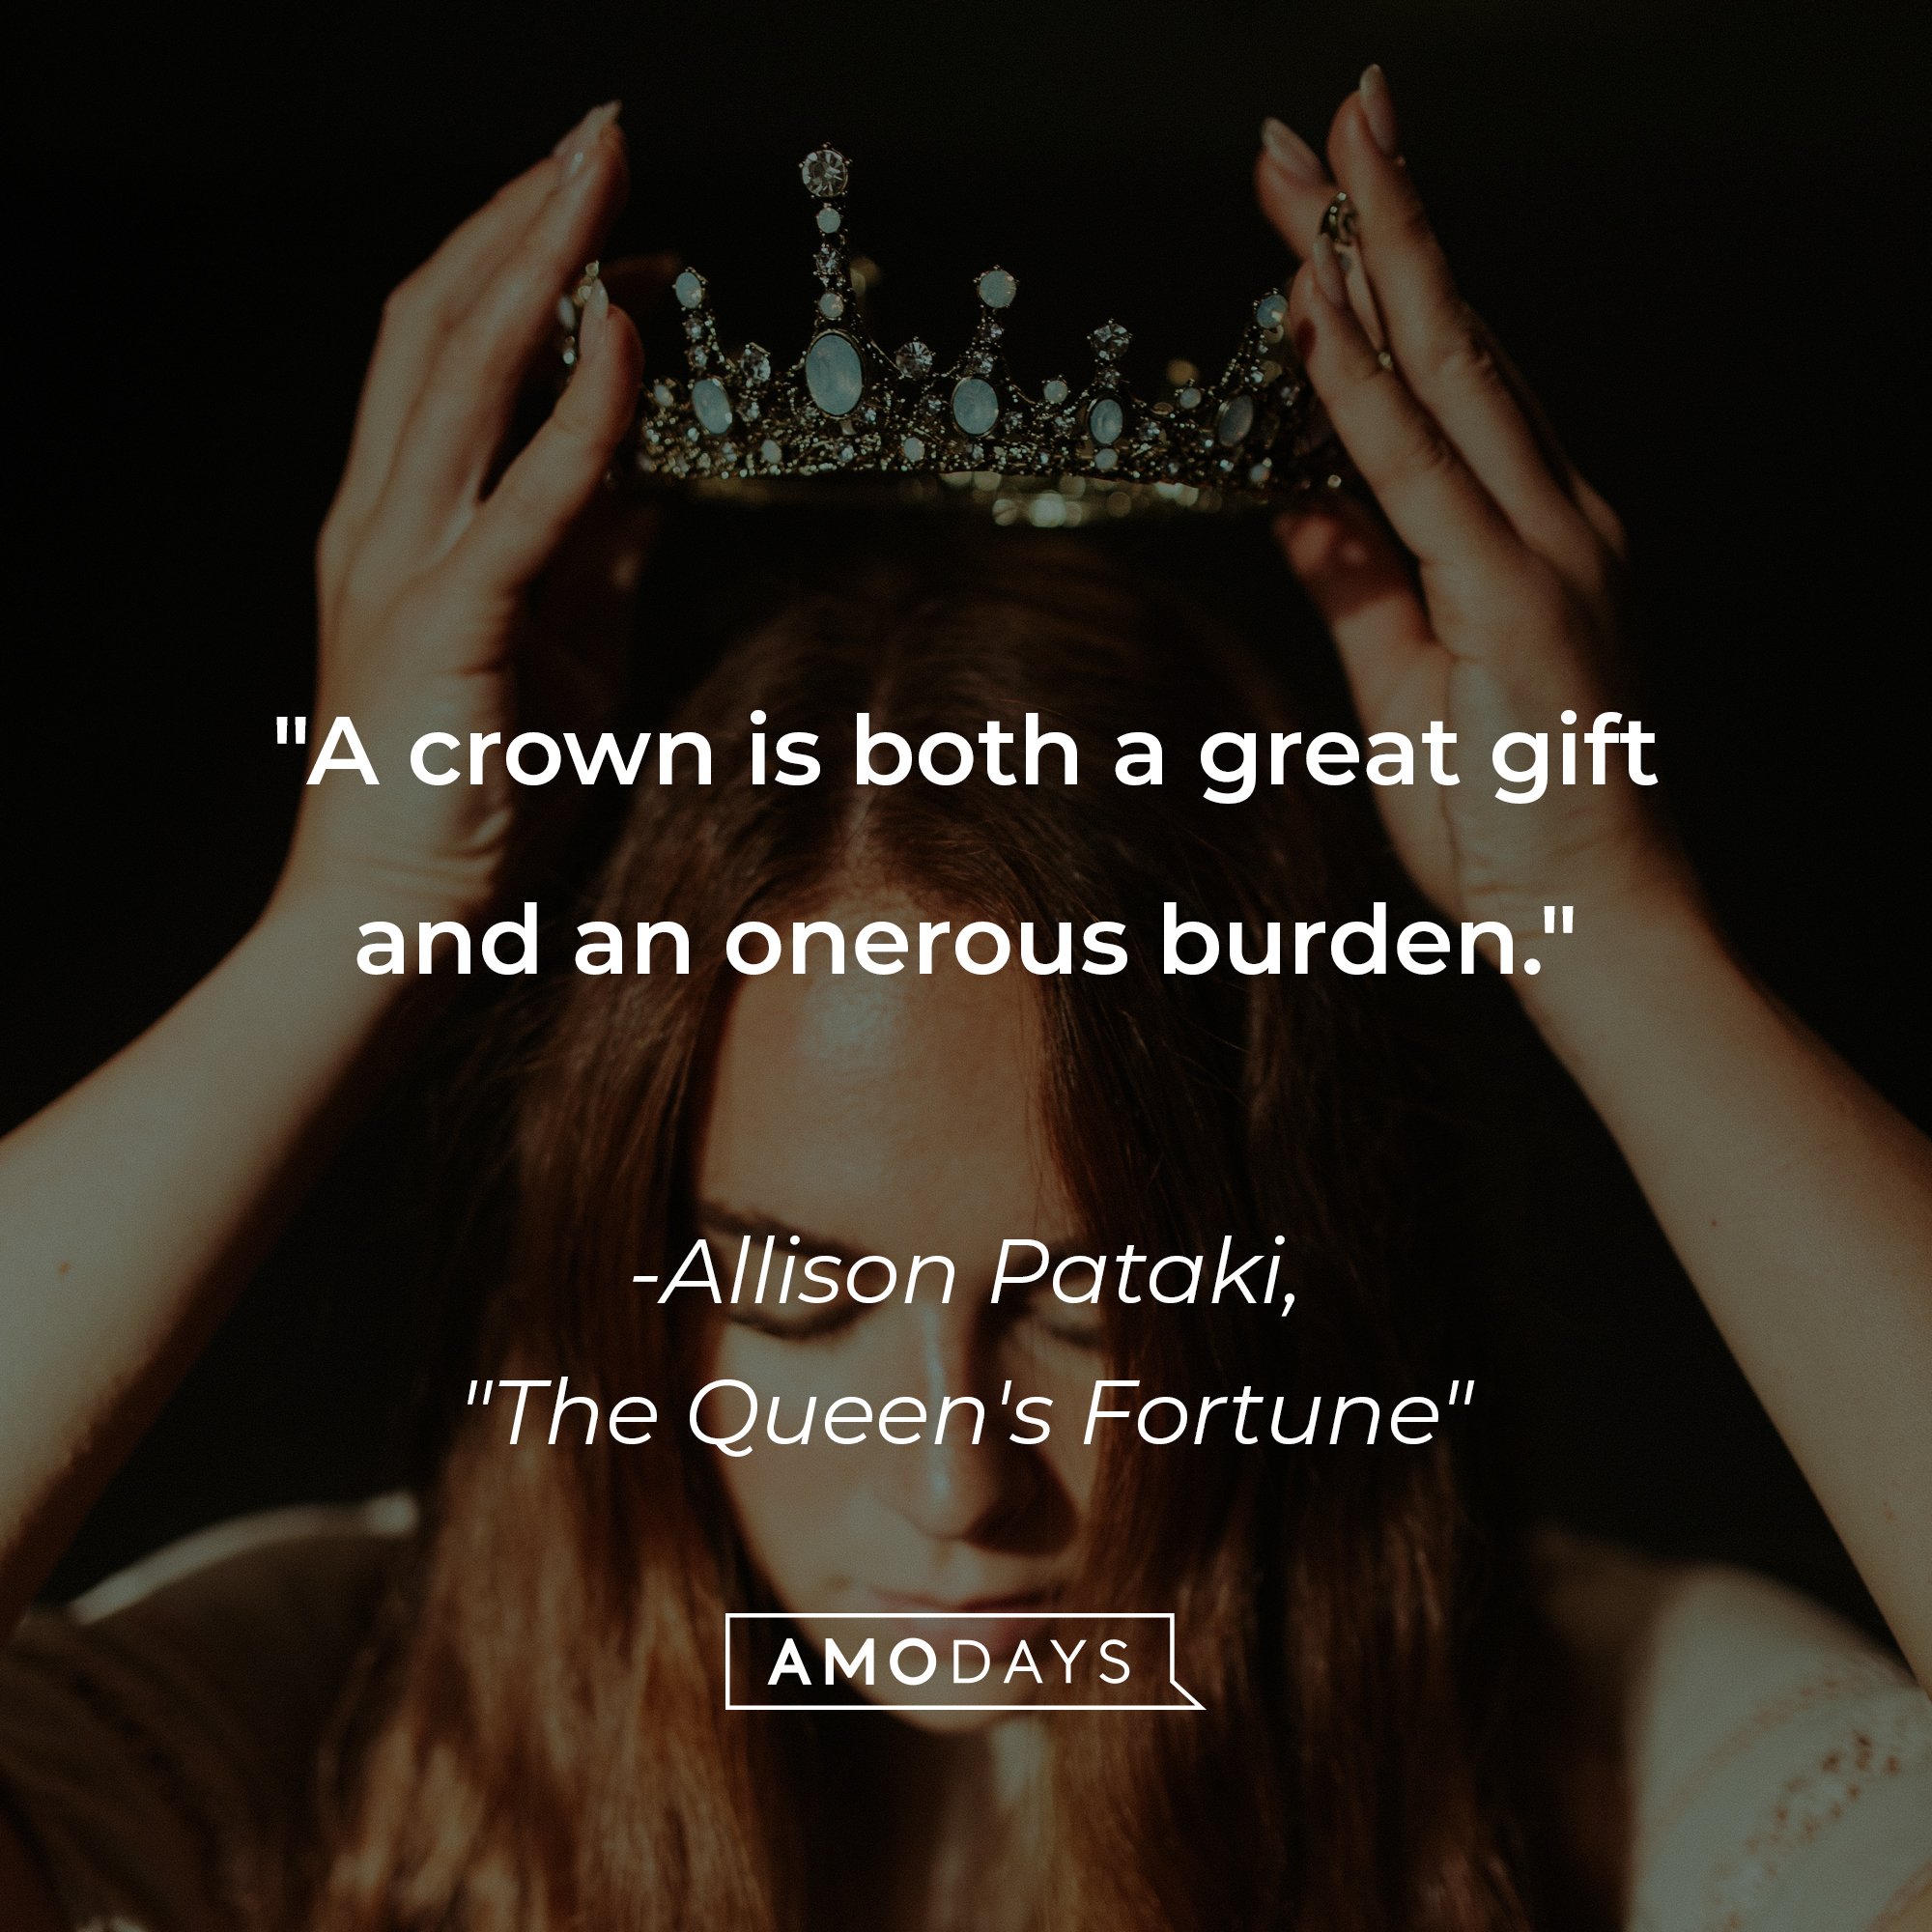 Allison Pataki's "The Queen's Fortune" quote: "A crown is both a great gift and an onerous burden." | Image: AmoDays